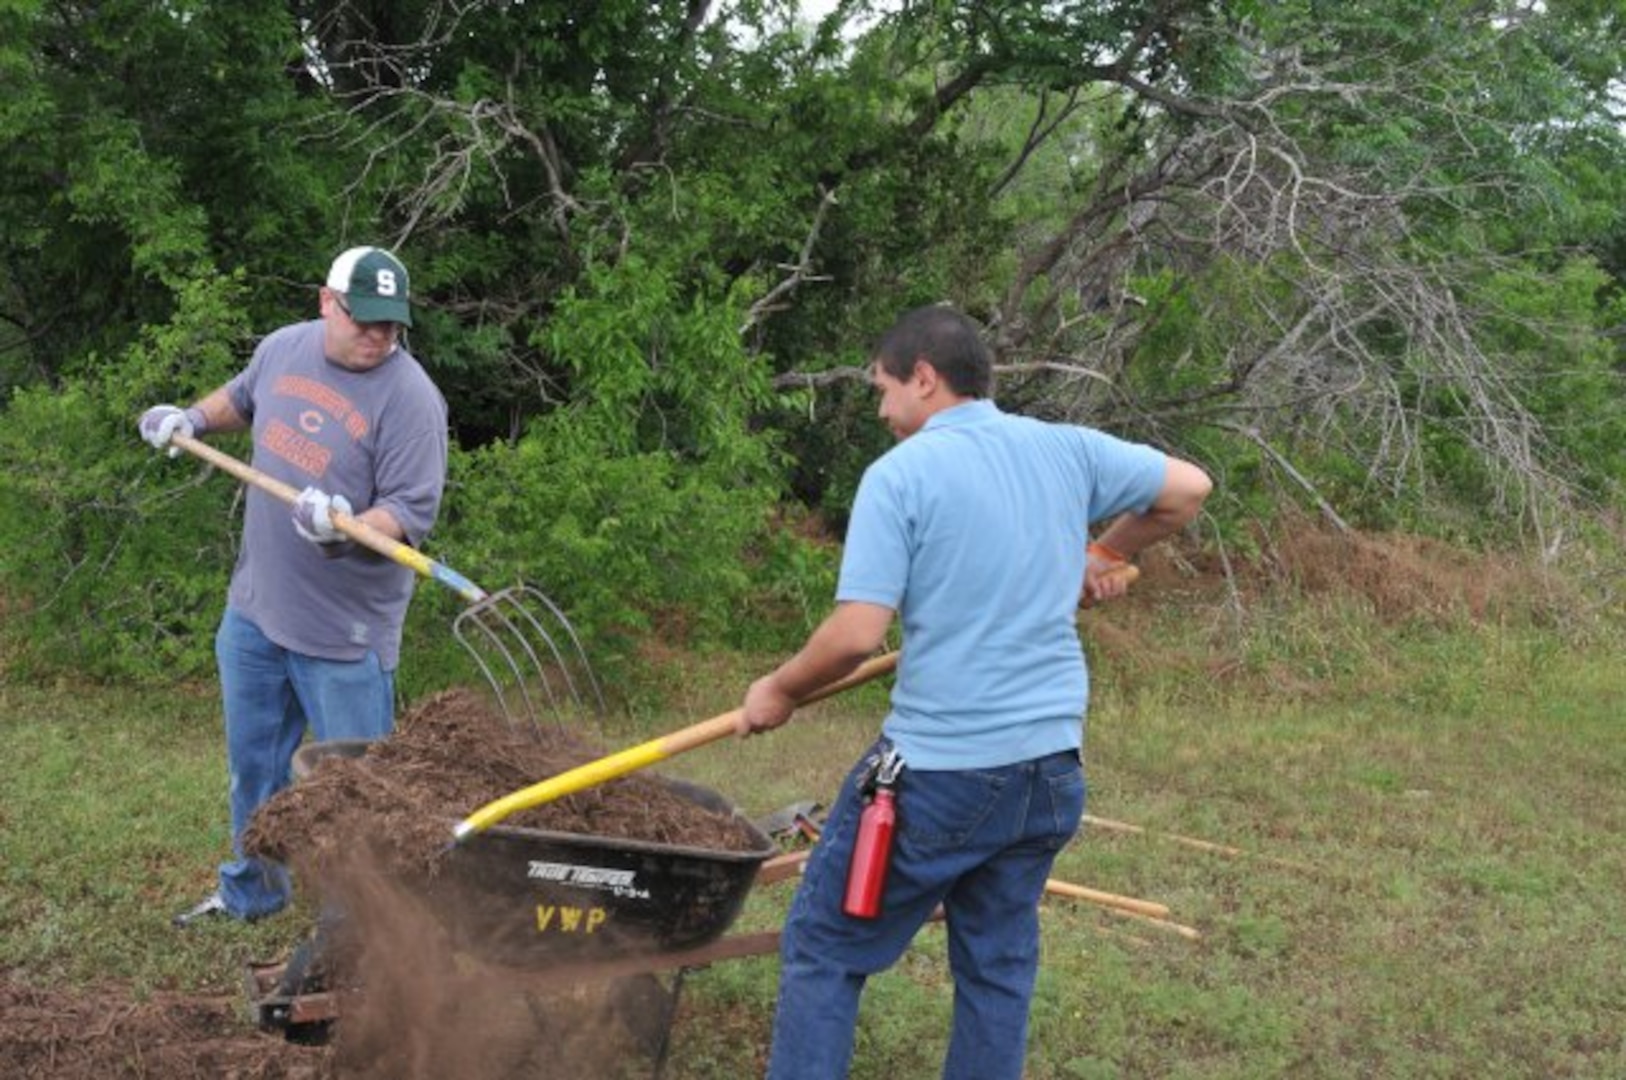 Eric Minor (left) and Derrick Lopez, U.S. Army Environmental Command, prepare to mulch trees at John James Park at a recent Cleanup event. U.S. Army Environmental Command employees teamed up with the San Antonio Parks and Recreation Department and other member organizations at Joint Base San Antonio to mulch trees and thin out invasive, non-native plant species from the park.
(U.S. Army photo/Barry Napp)